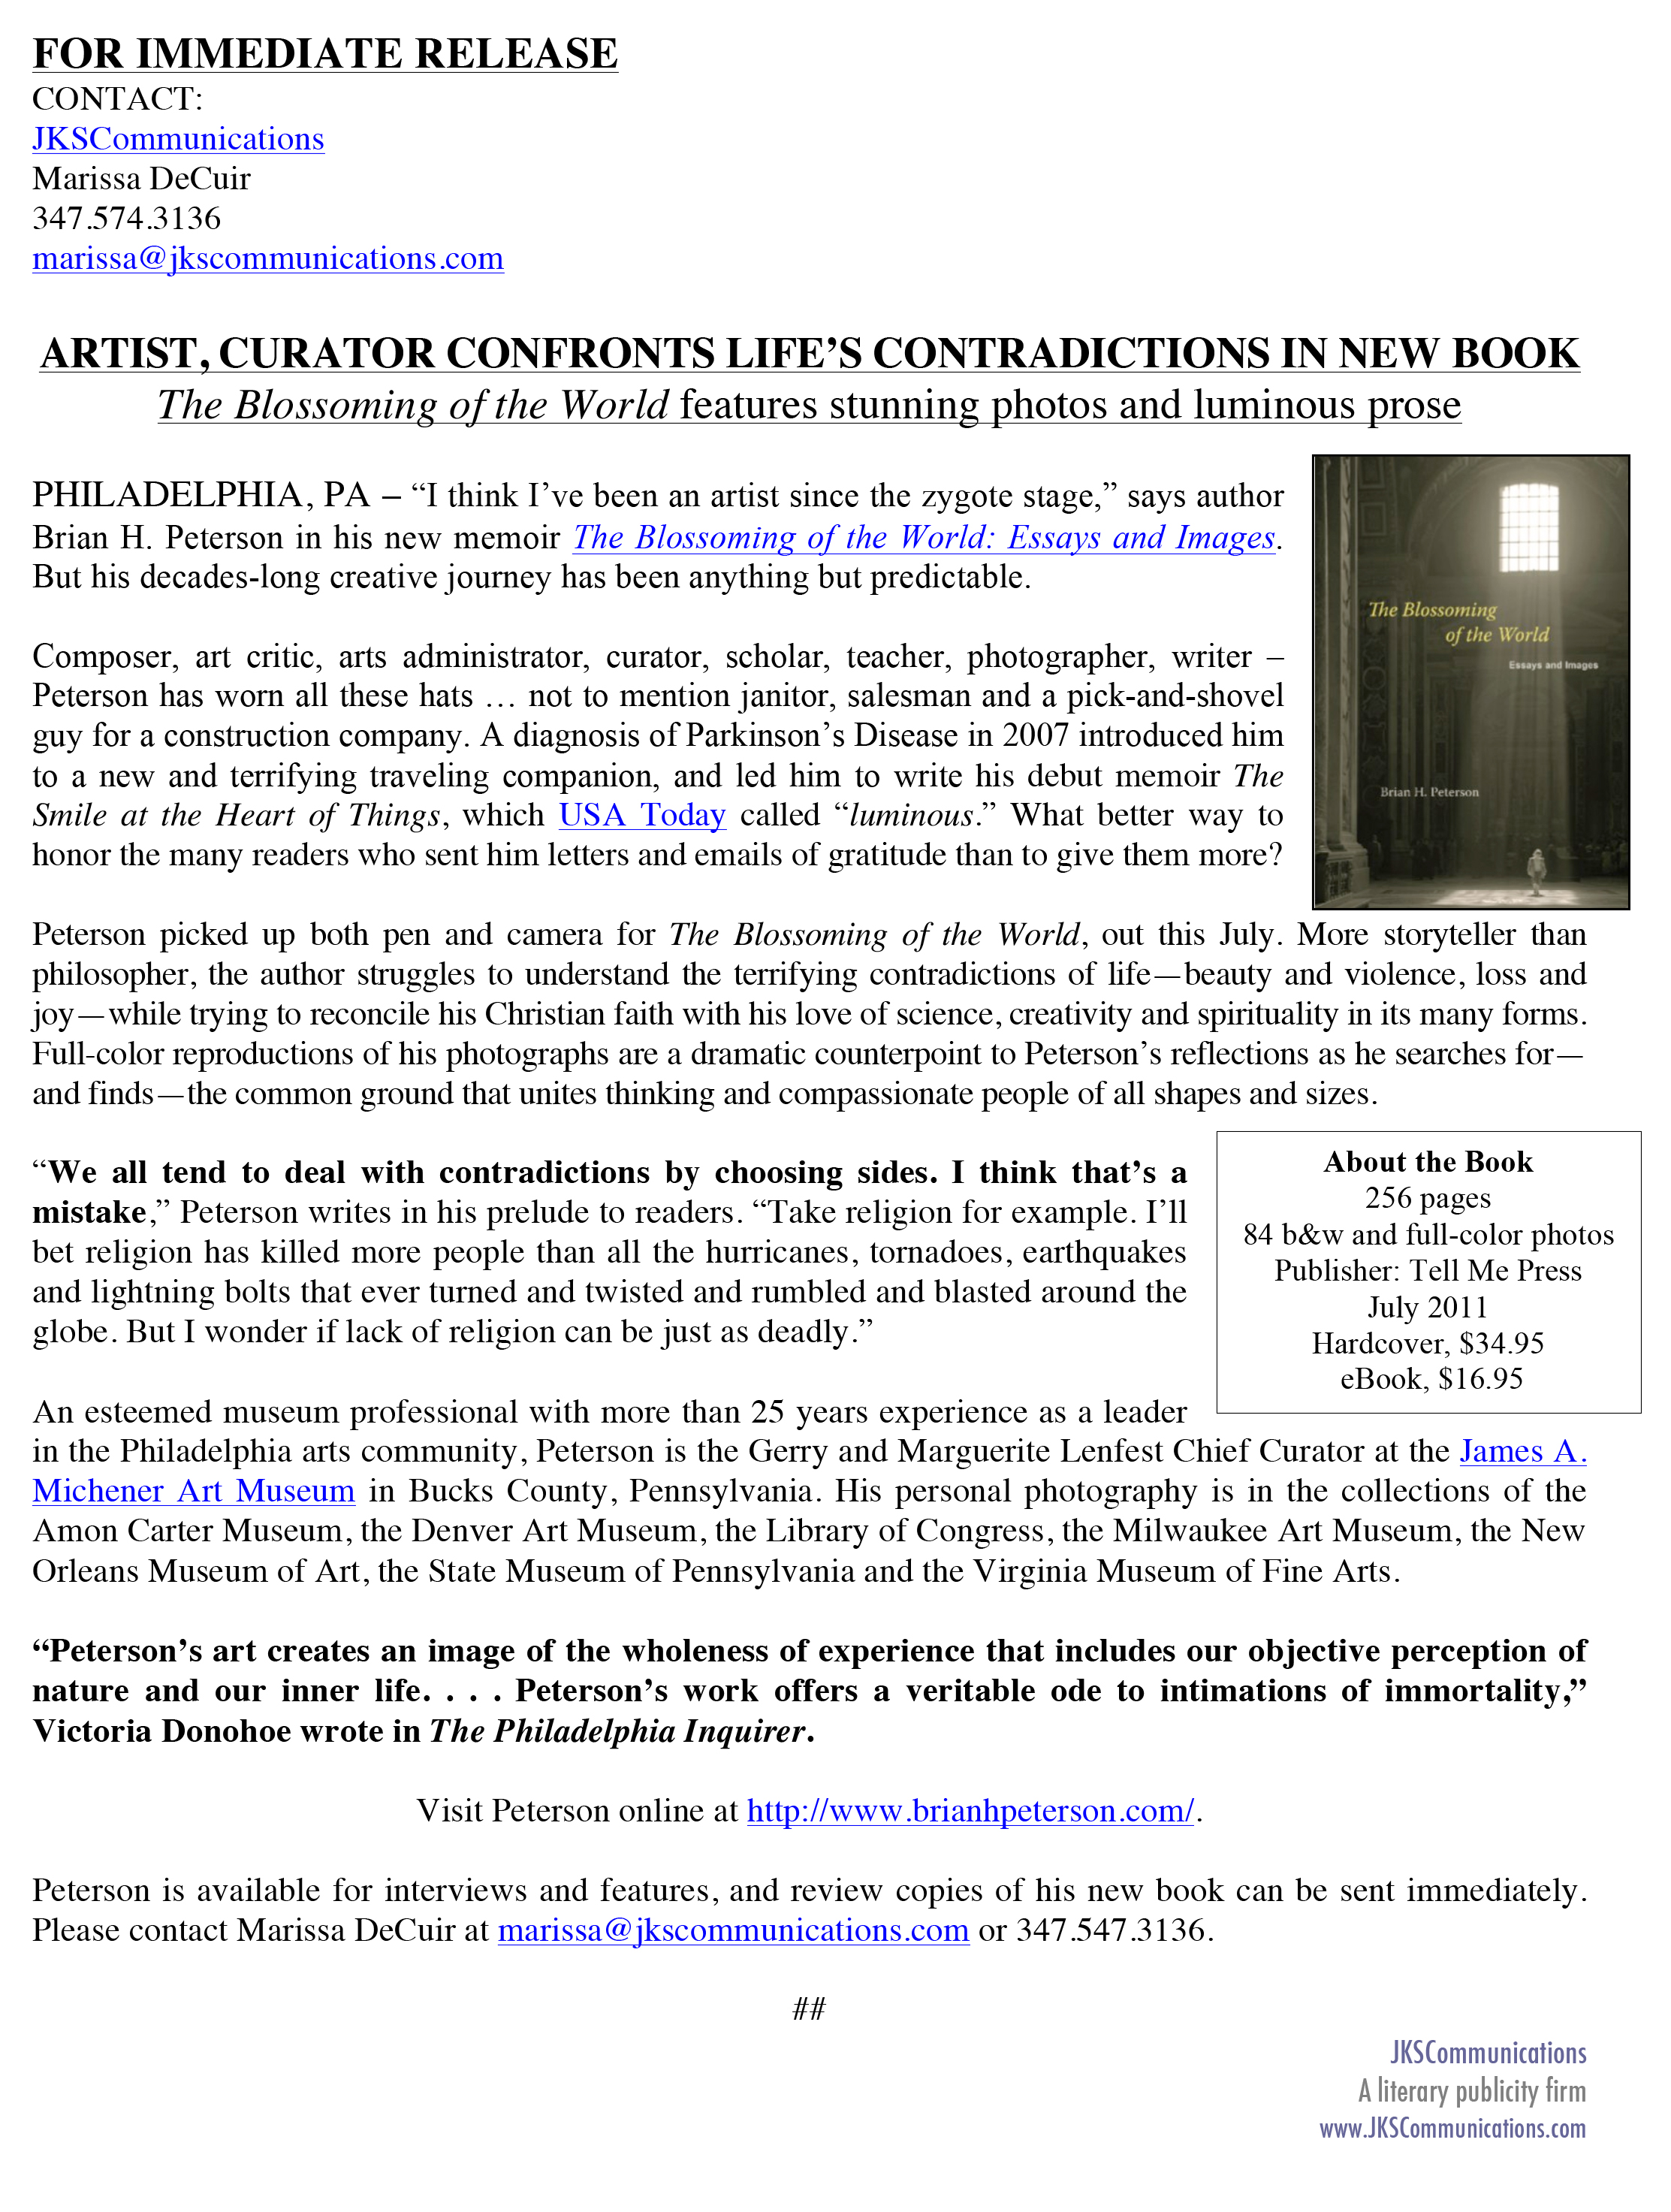 PRESS RELEASE_ARTIST, CURATOR CONFRONTS LIFEíS CONTRADICTIONS IN NEW BOOK-1.jpg